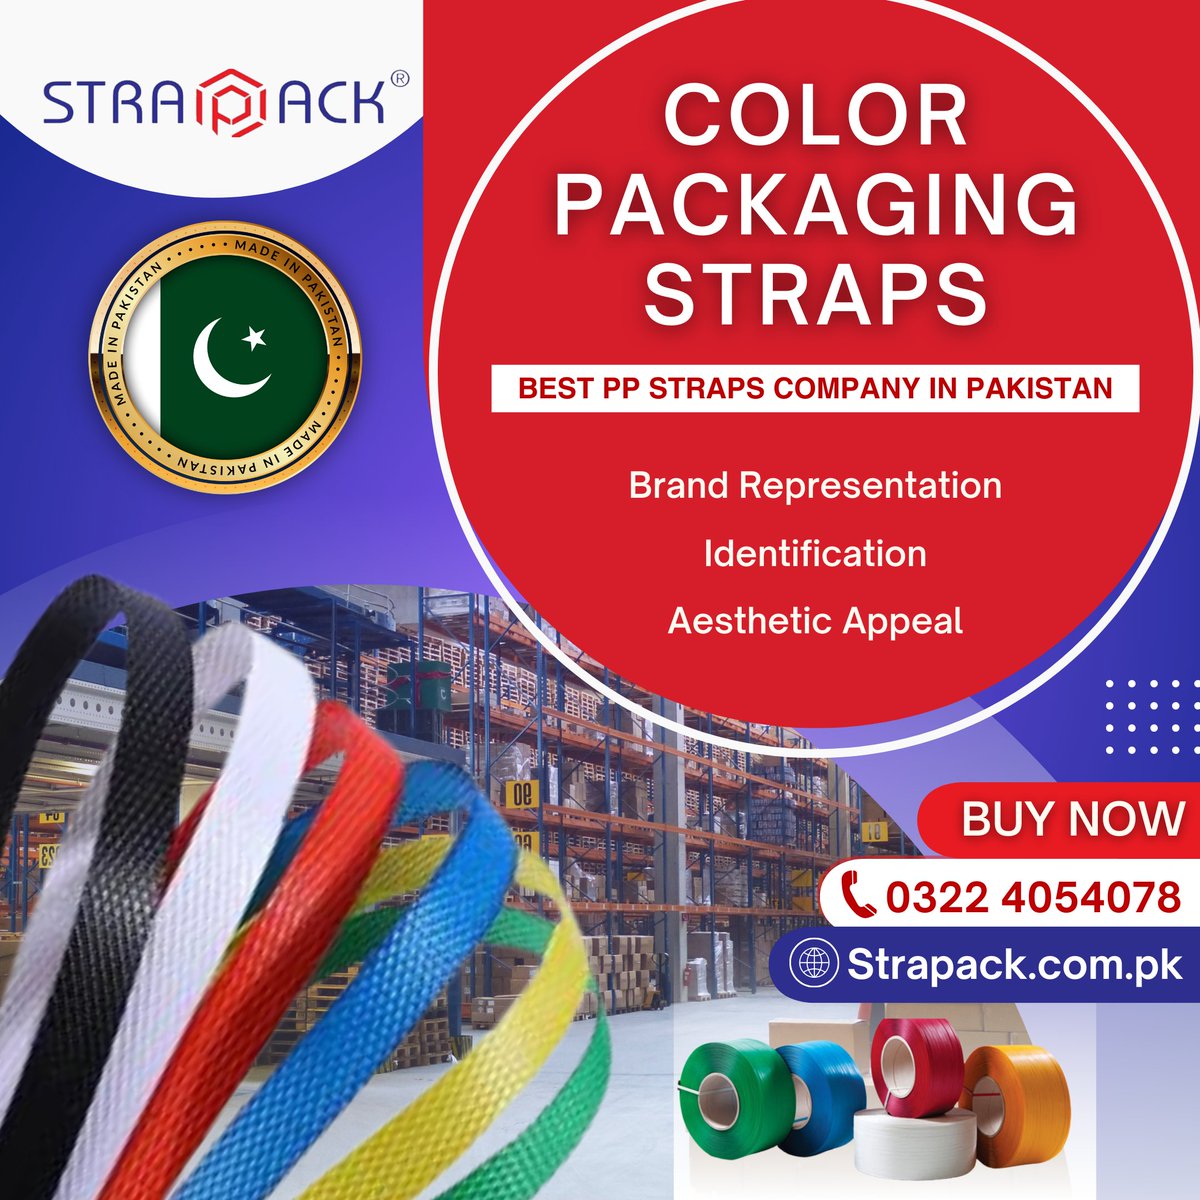 The Ultimate Choice for Identification and Brand Representation.  
.
Contact Us: 0322 4054078
Website: strapack.com.pk
.
#PackagingStraps #StrongAndStylish #PPStraps #Packaging #ppstraps 📦